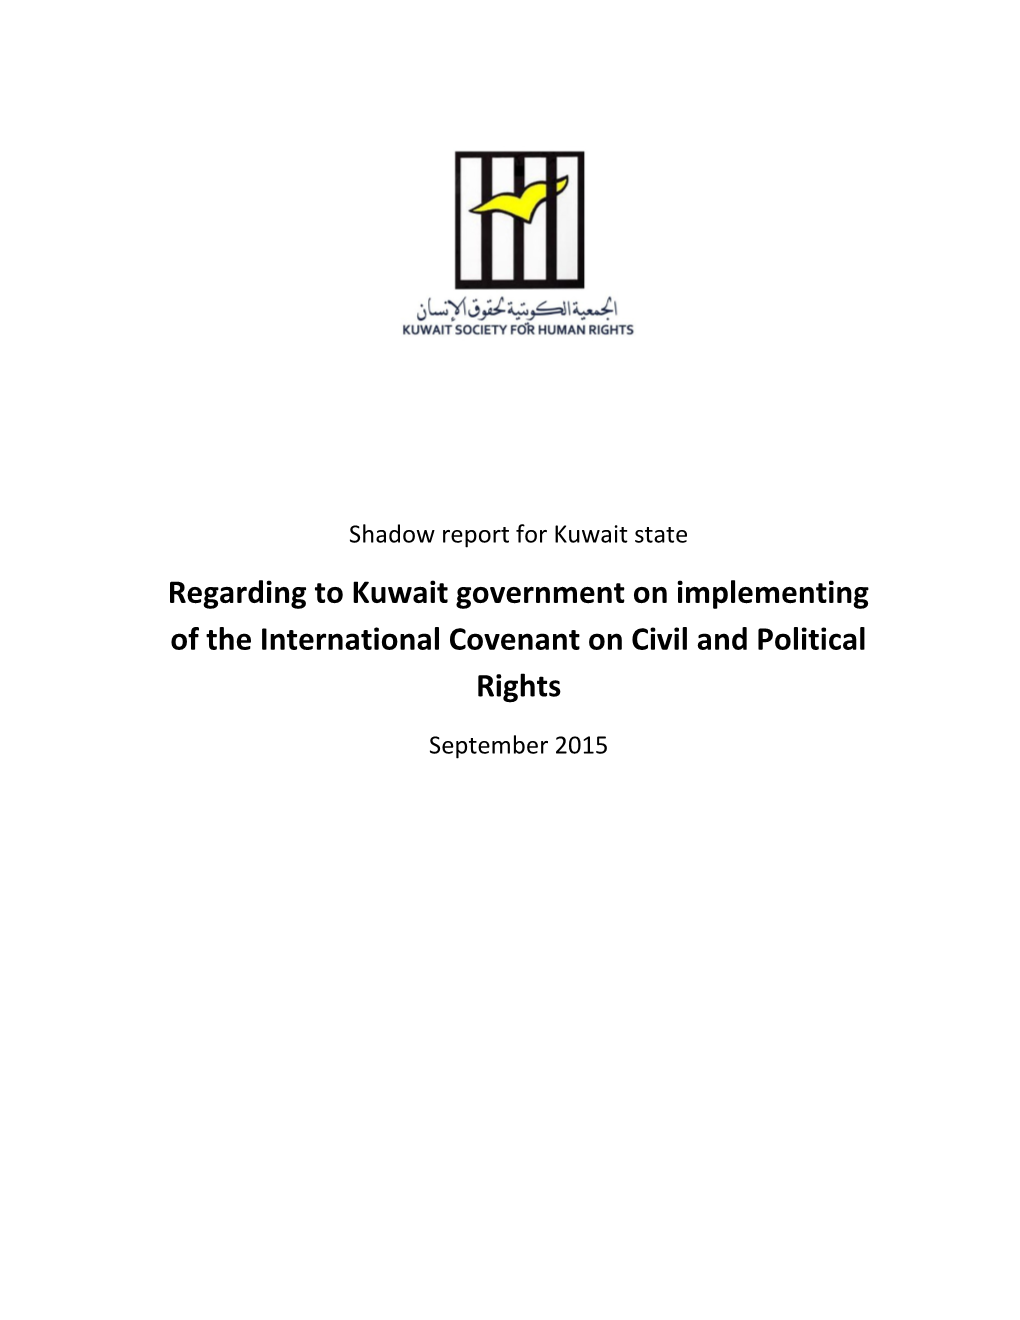 Regarding to Kuwait Government on Implementing of the International Covenant on Civil